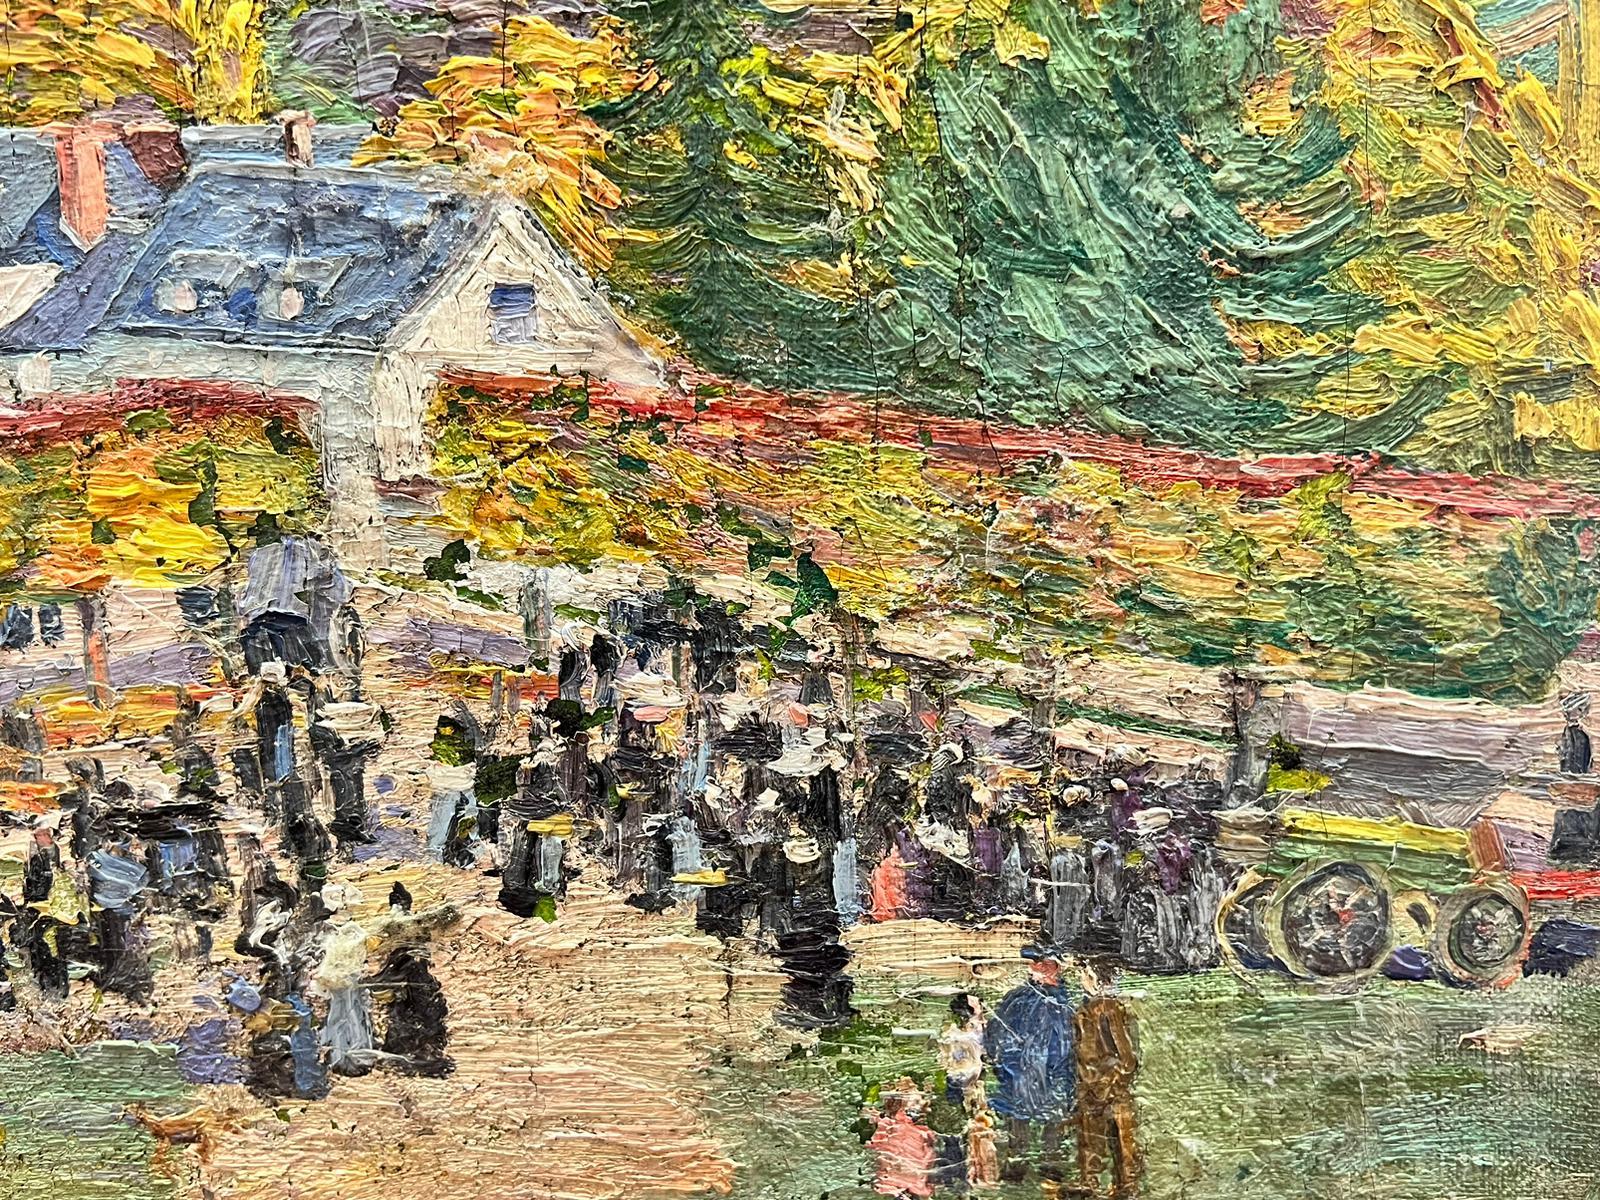 Artist/ School: Suzanne Crochet (French c. 1930) French Impressionist artist

Title: the Village Gathering

Medium: oil on stretched canvas on board, unframed 

board: 10 x 14 inches

Provenance: private collection, France

Condition: The painting